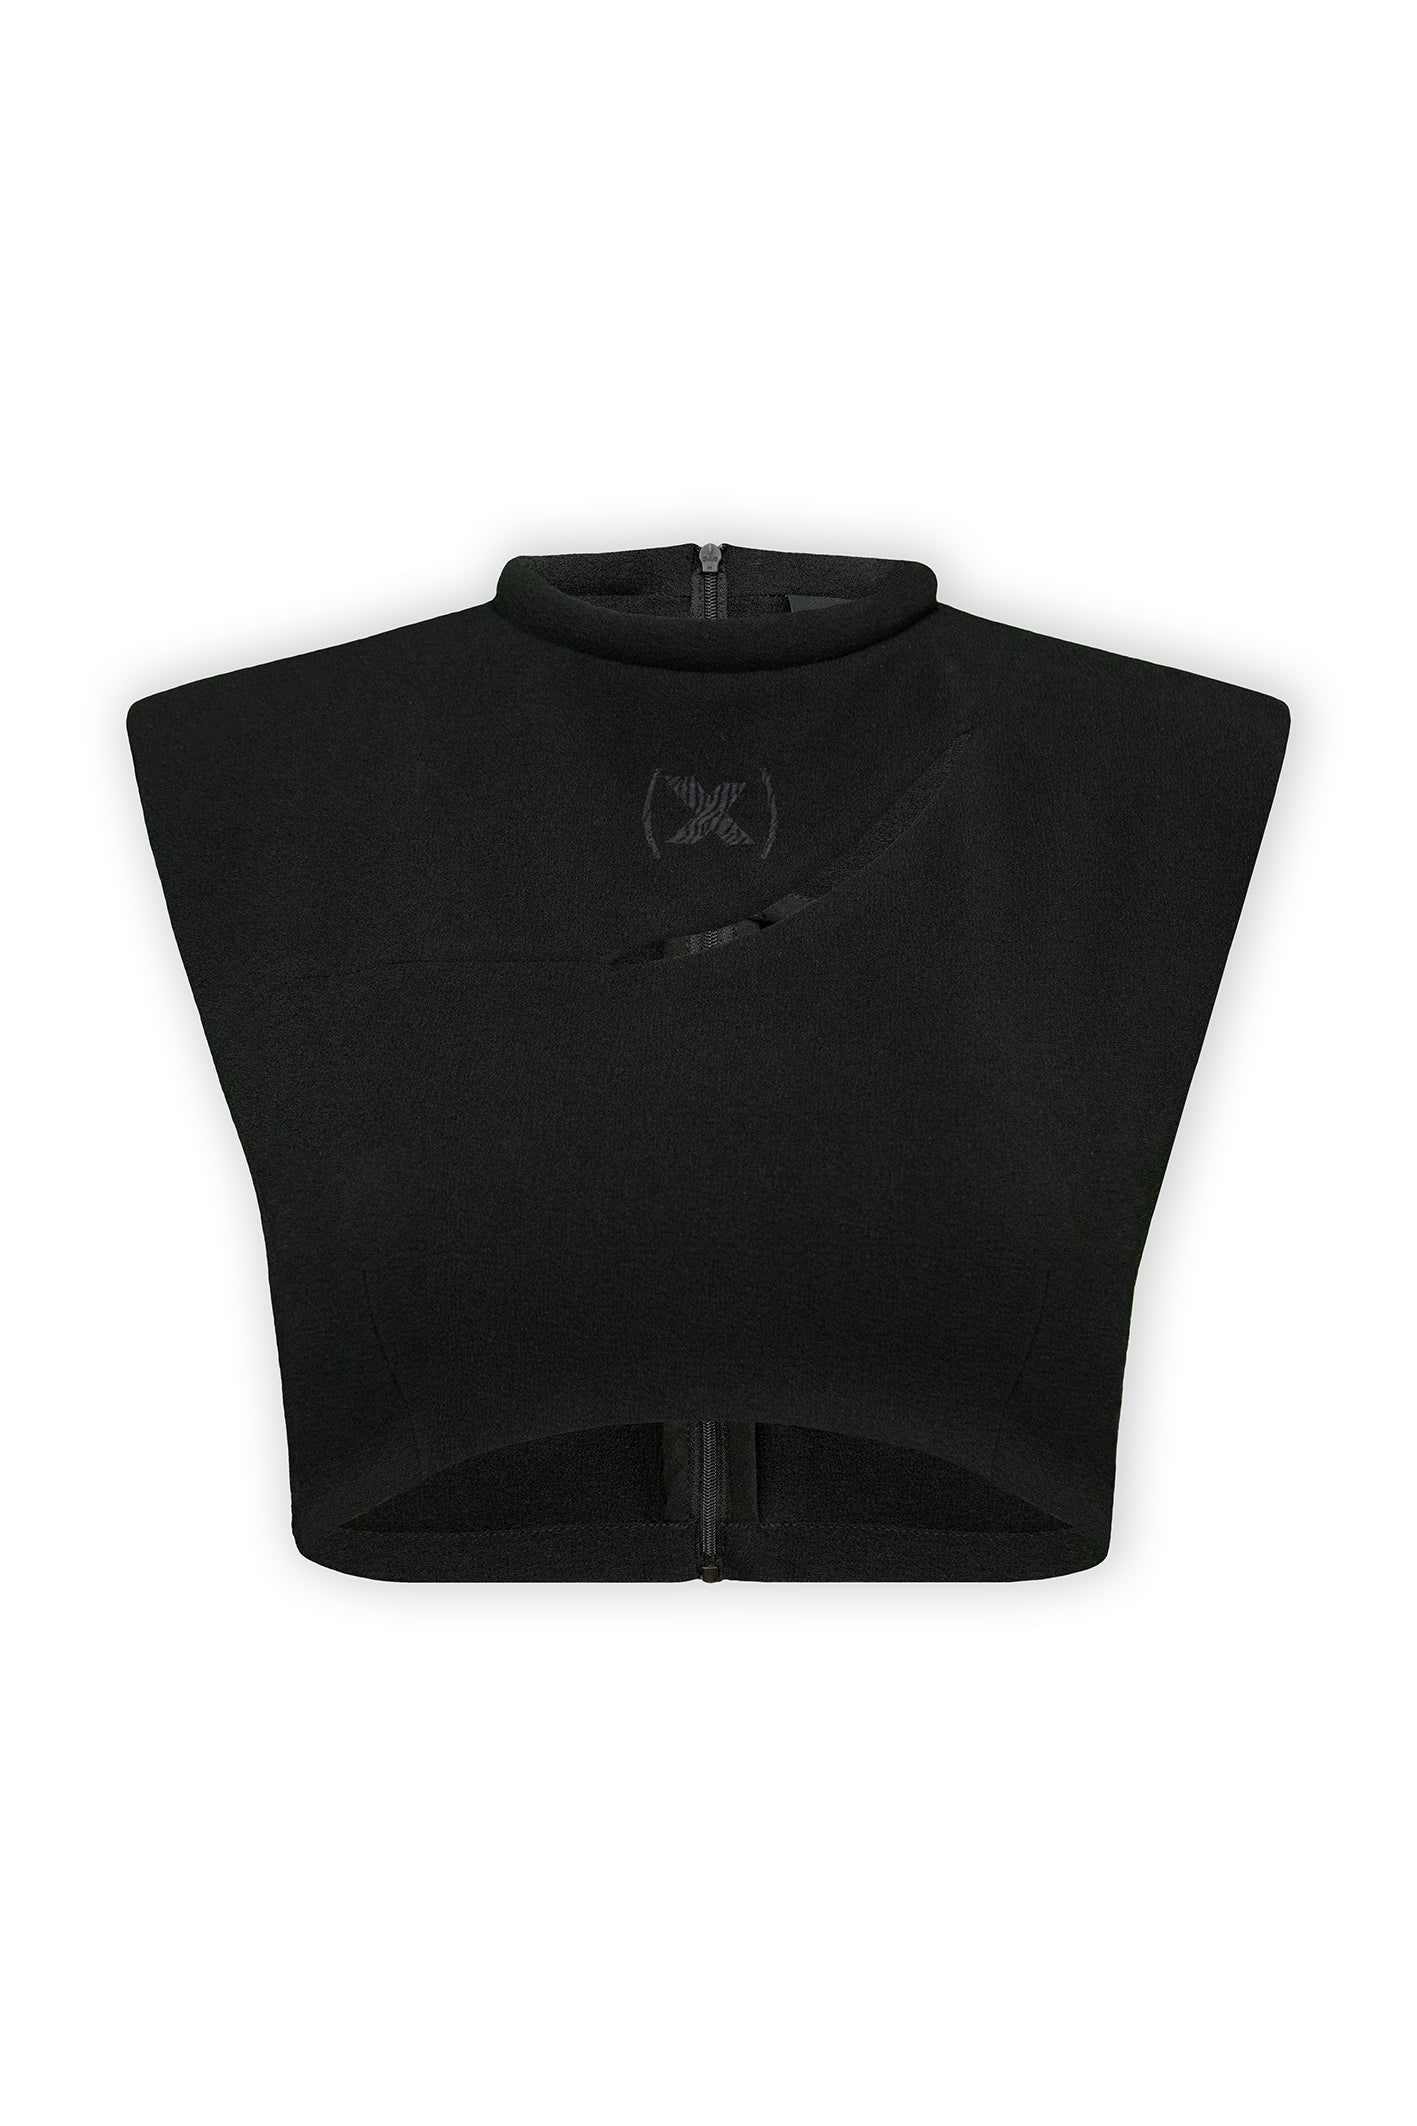 Black padded crop top with a neck rope and embroidery. The embroidery's position is in the upper frontal centre of the padded crop top with an original design. The padded crop top photograph is from the front on a white background.